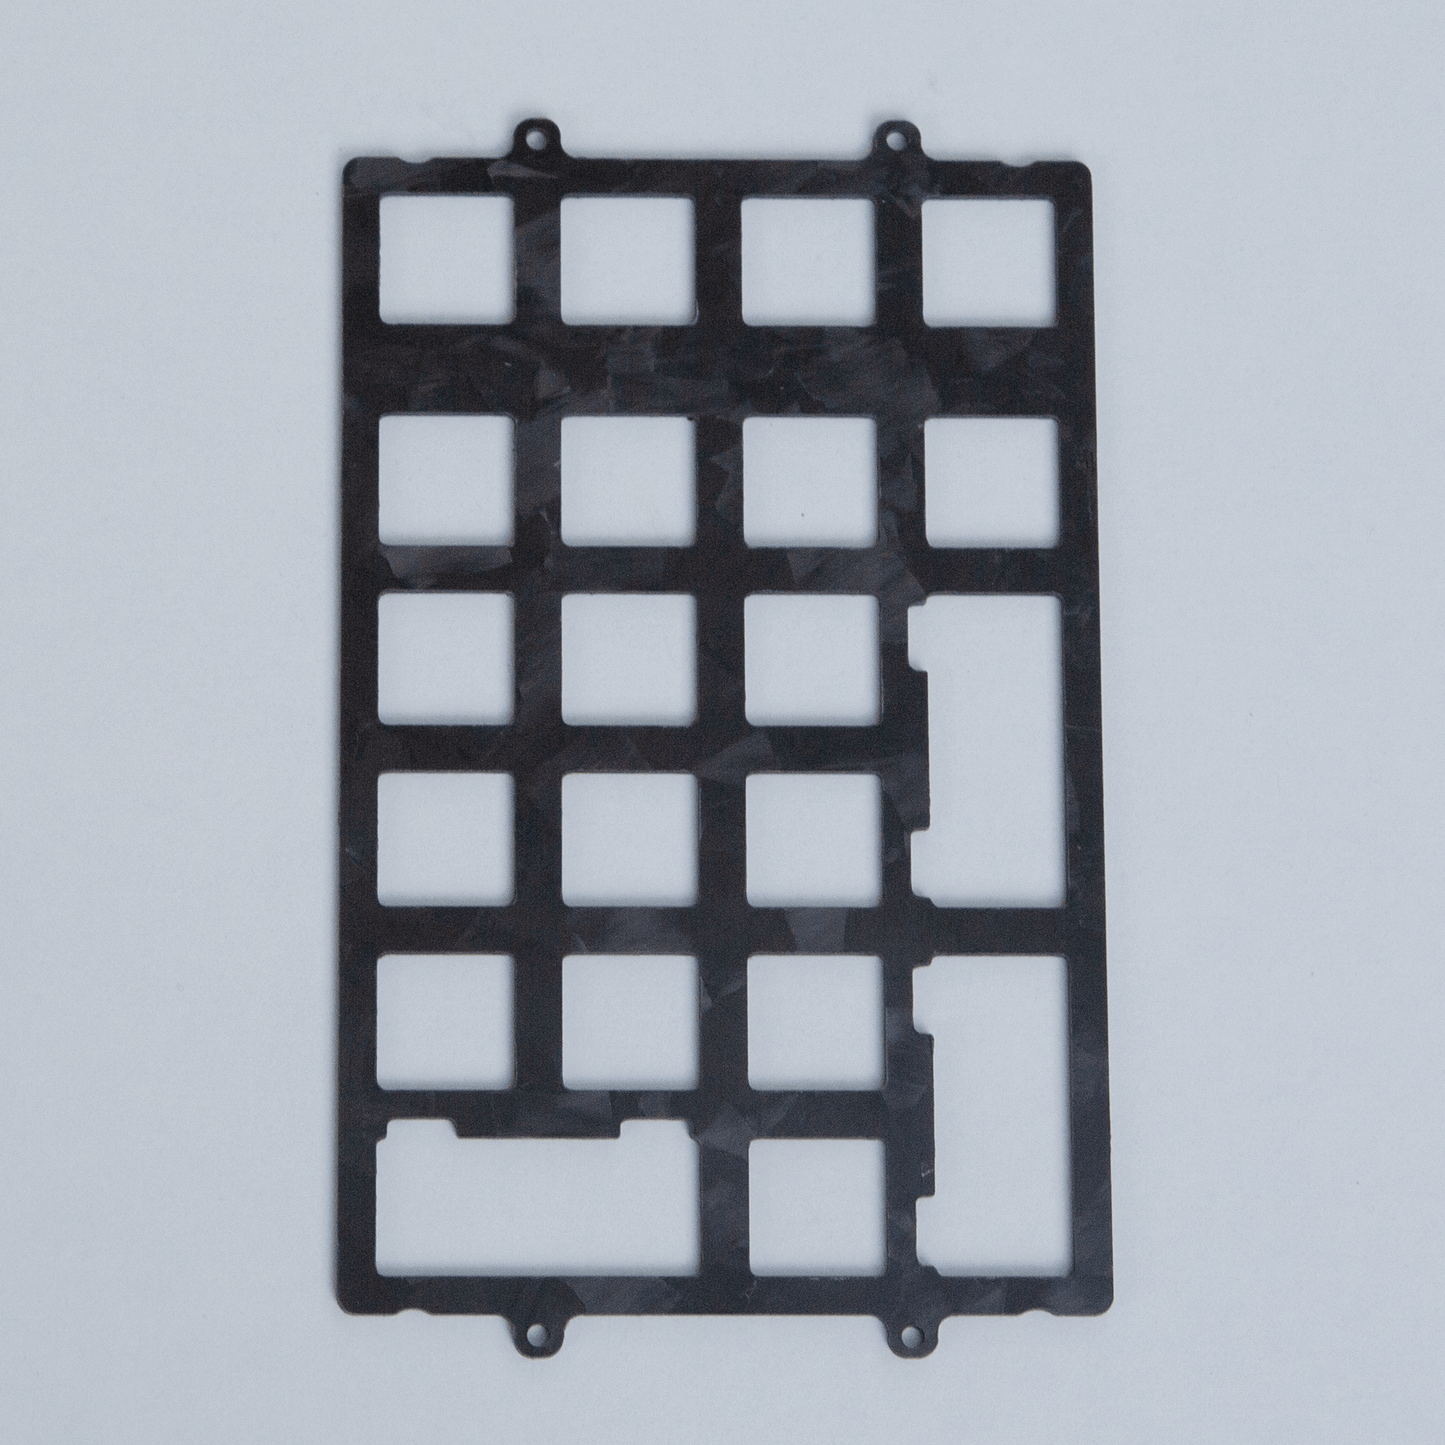 KeebCats UK [EXTRAS] KBDfans KBDpad MKII - Universal Plate Forged Carbon Fibre